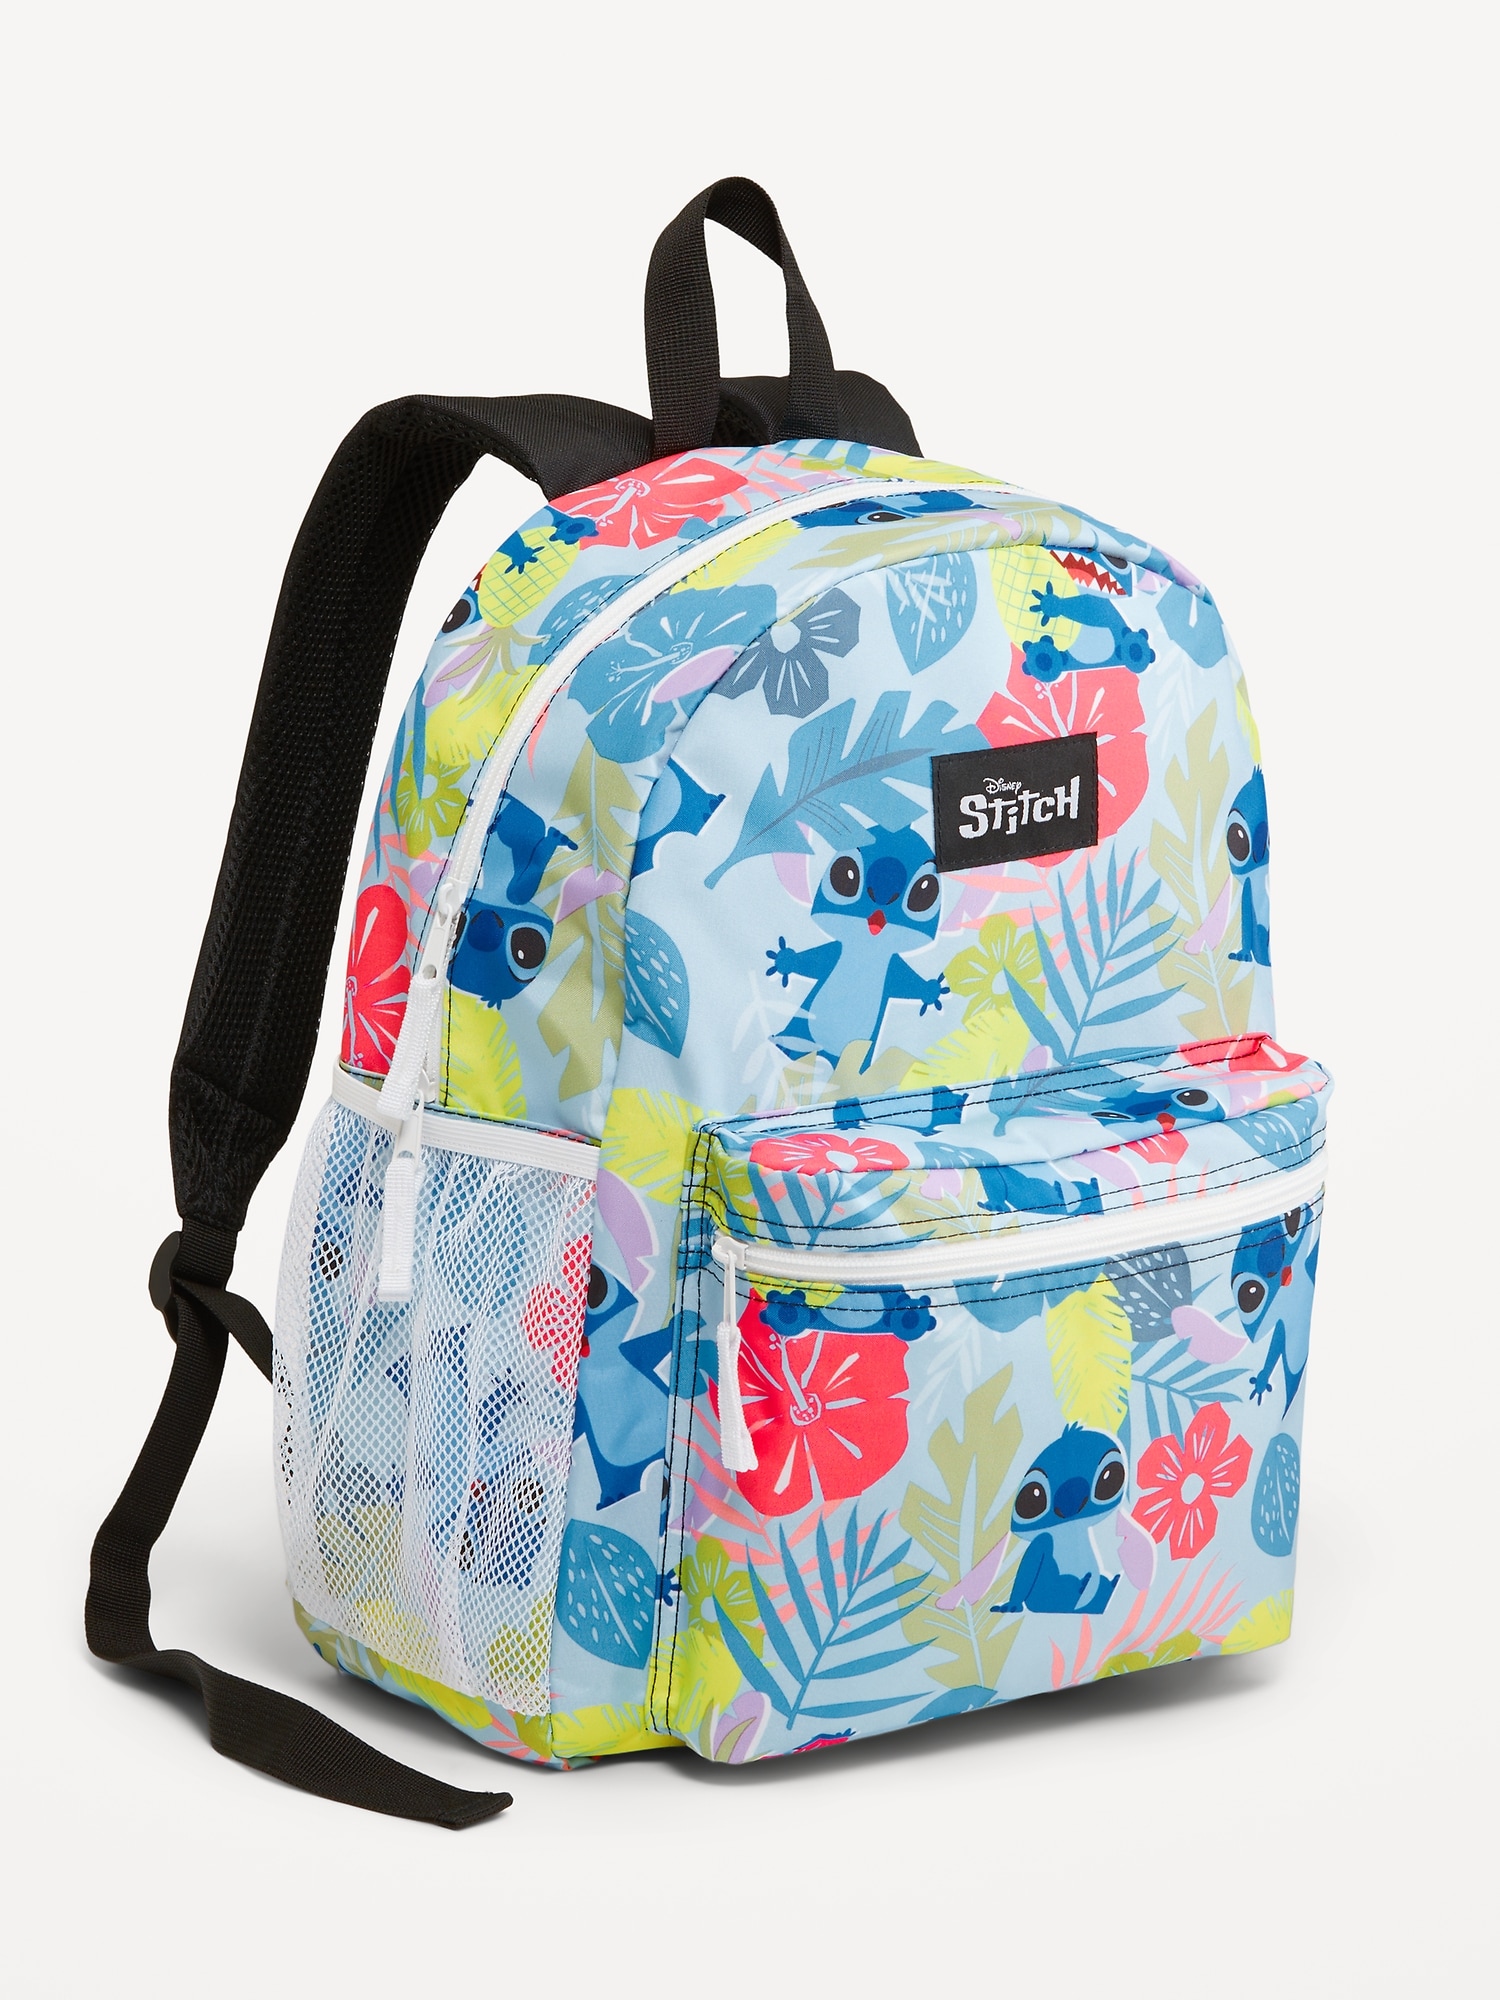 Disney© Lilo & Stitch Canvas Backpack for Kids